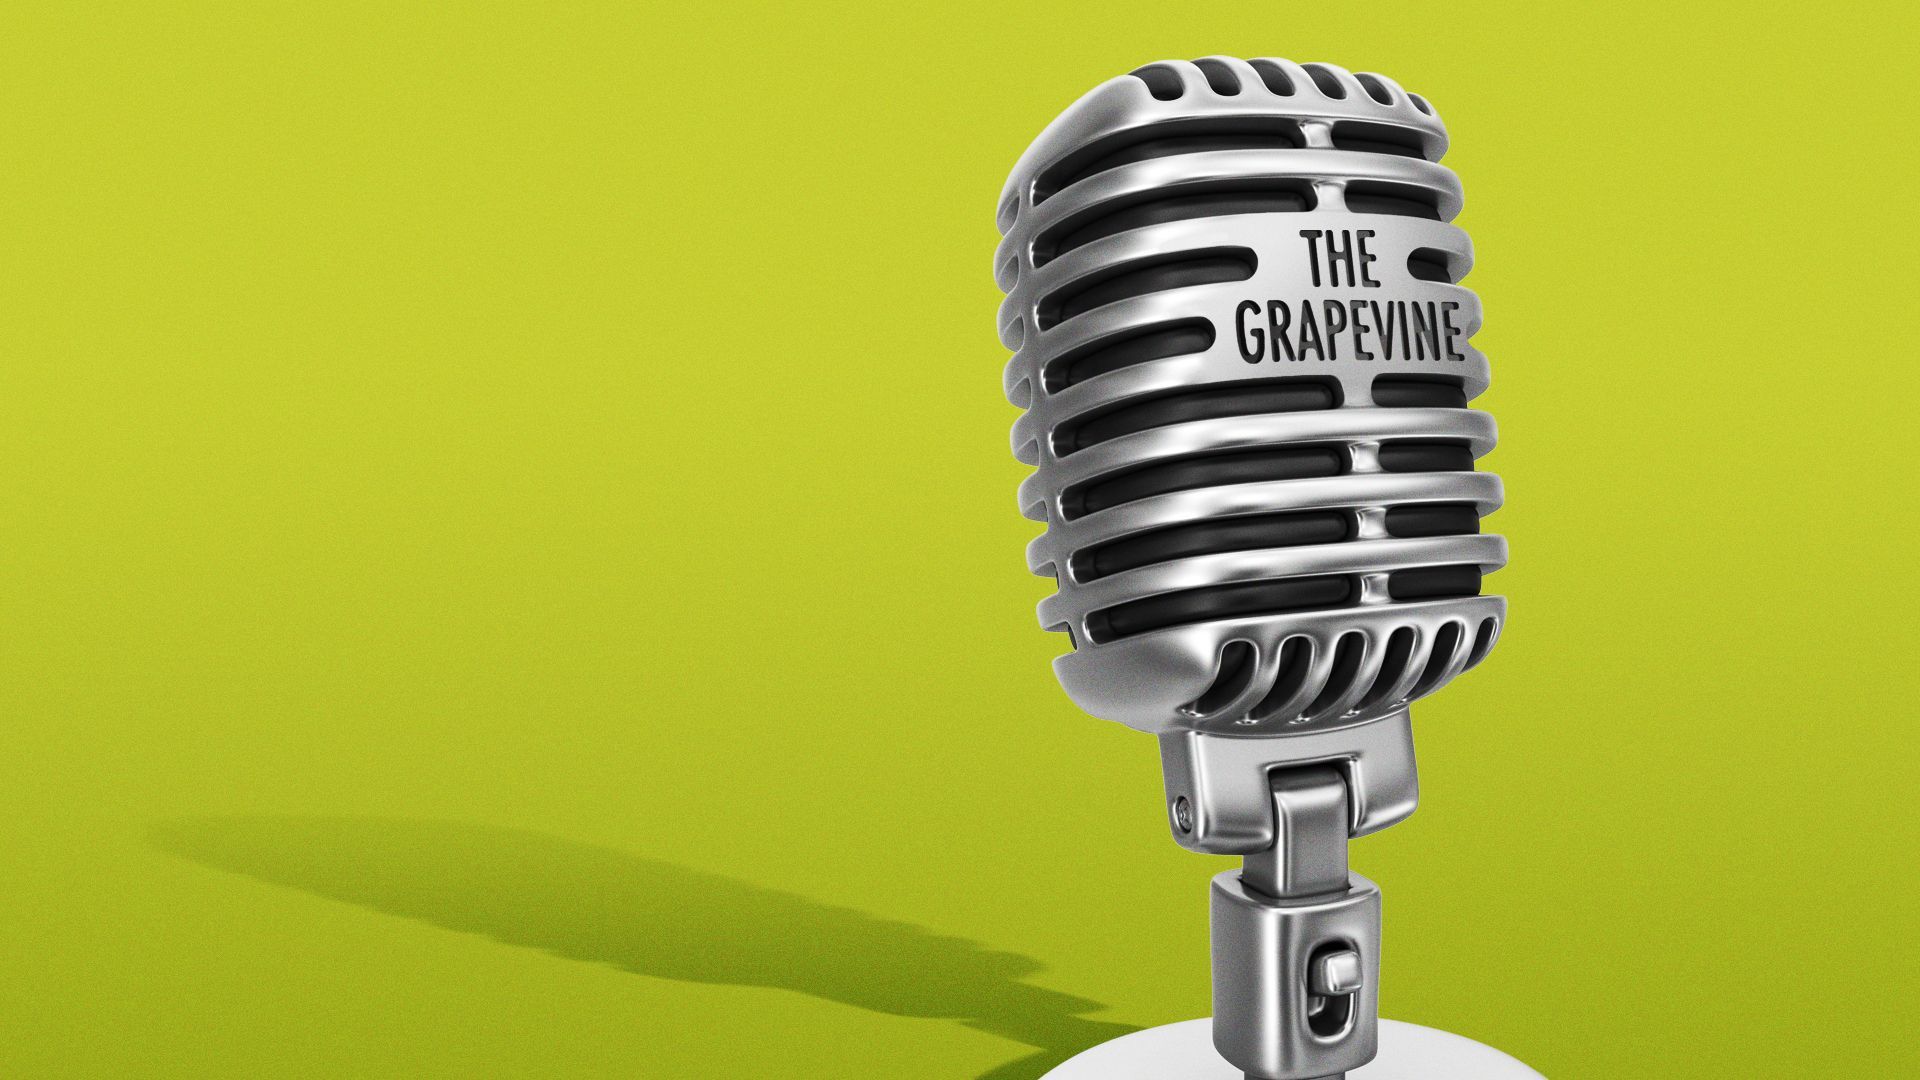 Illustration of a retro microphone. Some of the slits have been replaced with "The Grapevine."